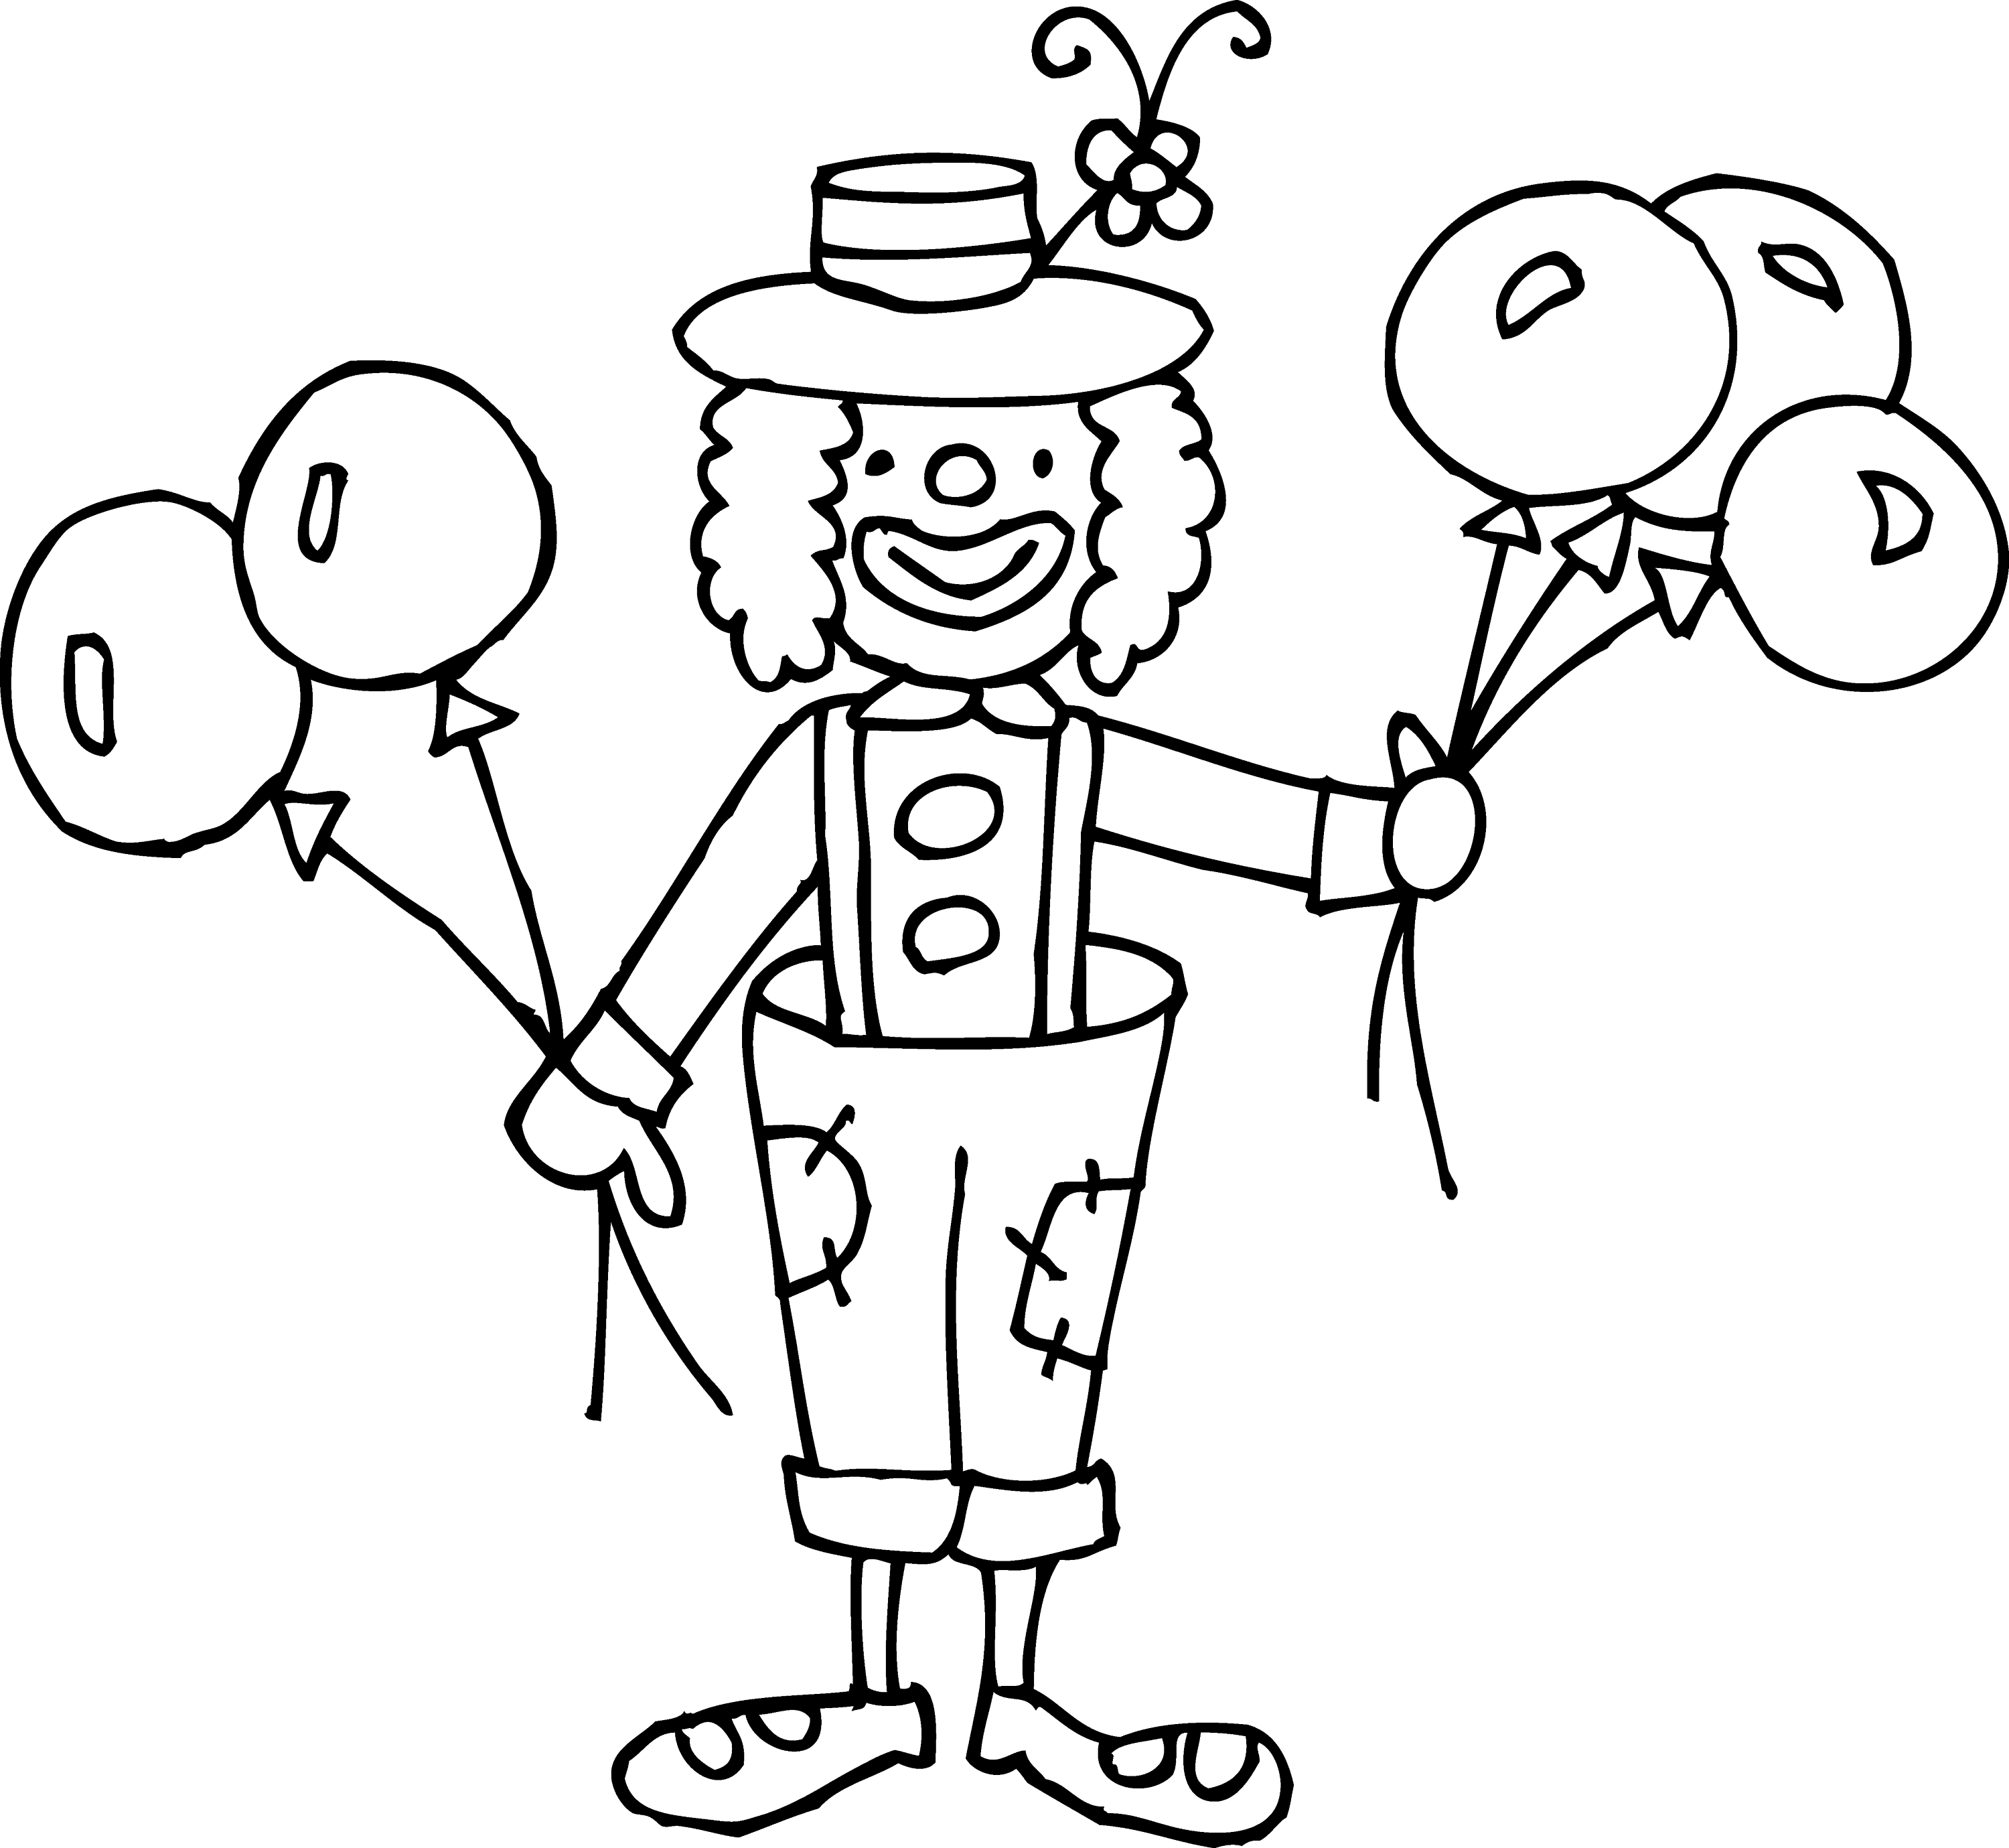 Silly Clown Coloring Page - Free Clip Art